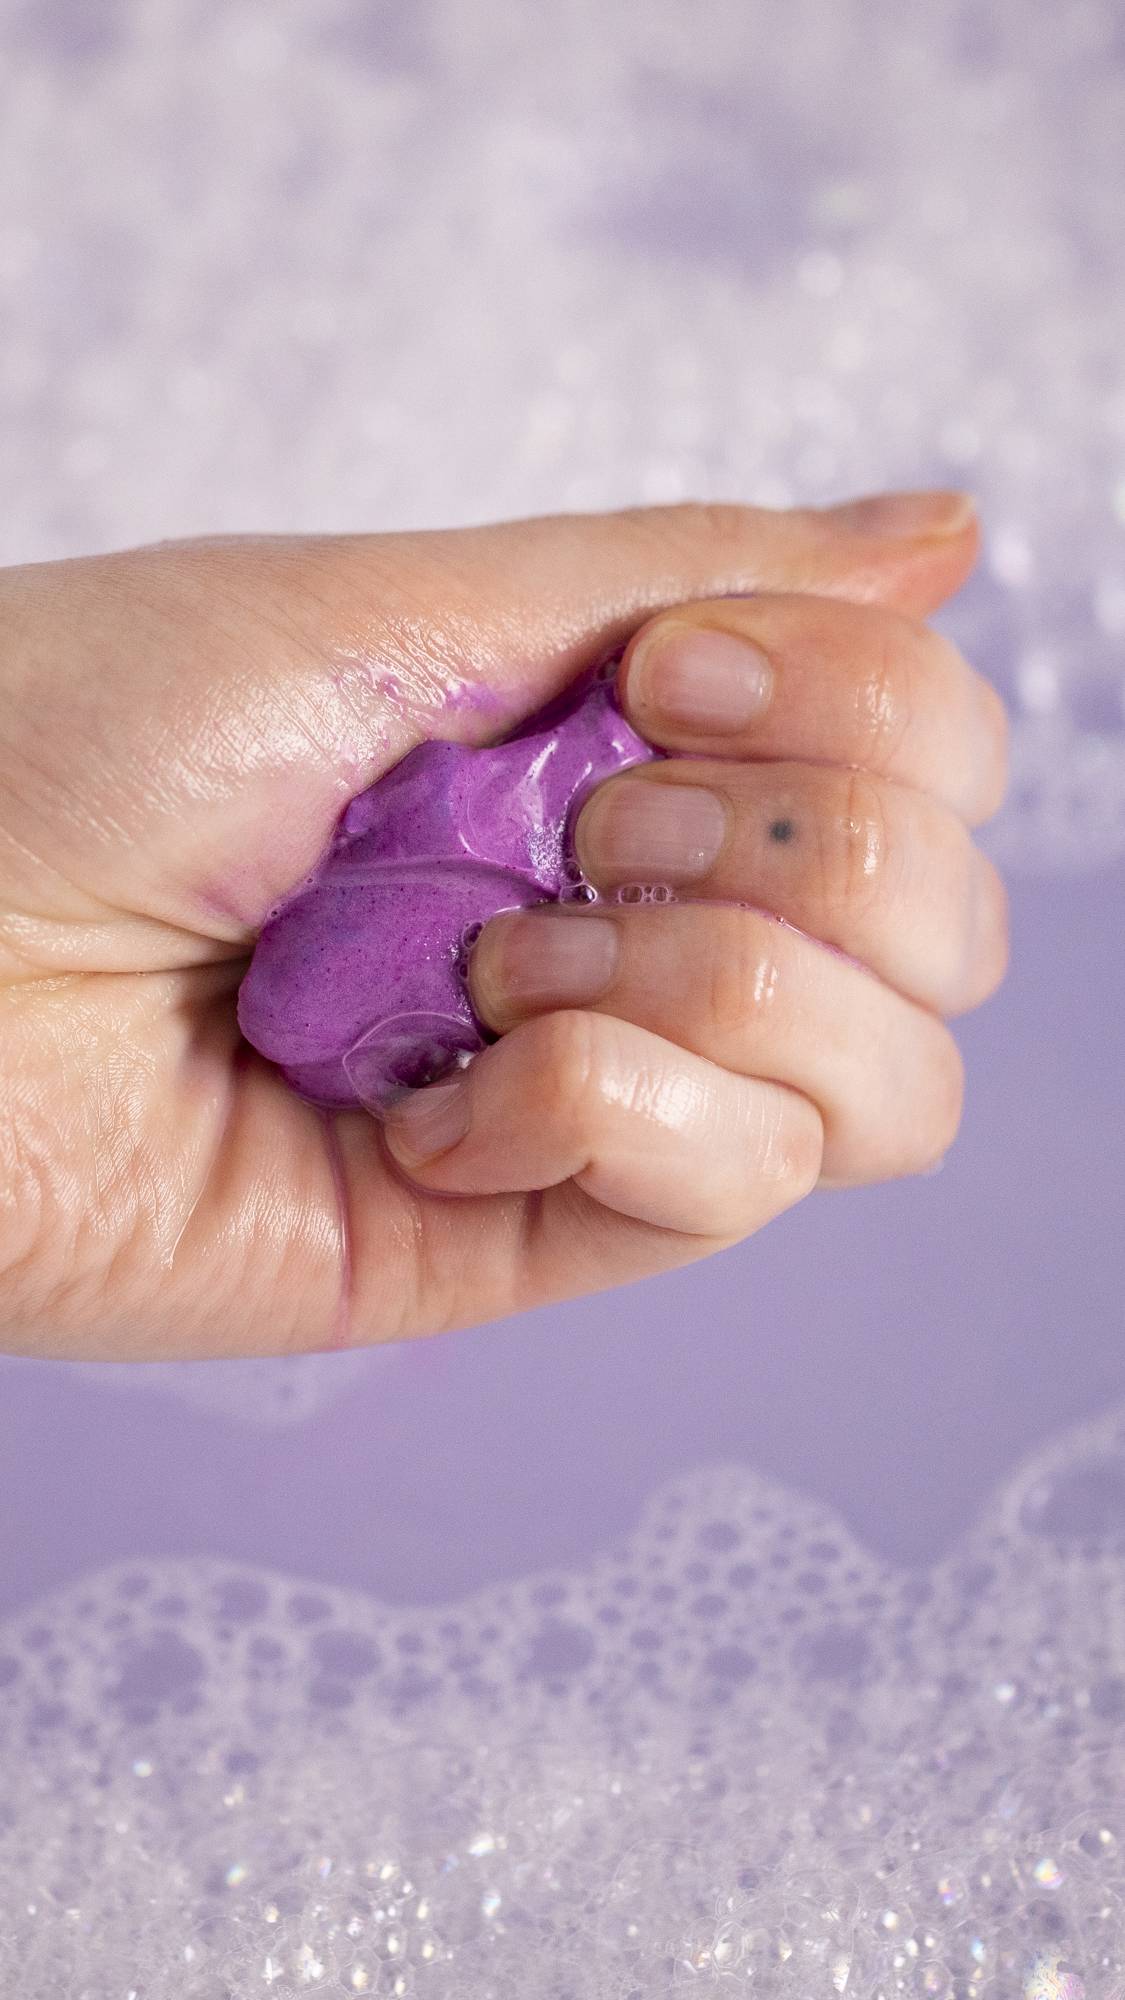 A close-up image of the model's hand as they have squeezed the product into a fun, play-doh-styled lump showing lilac waters and bubbles below. 